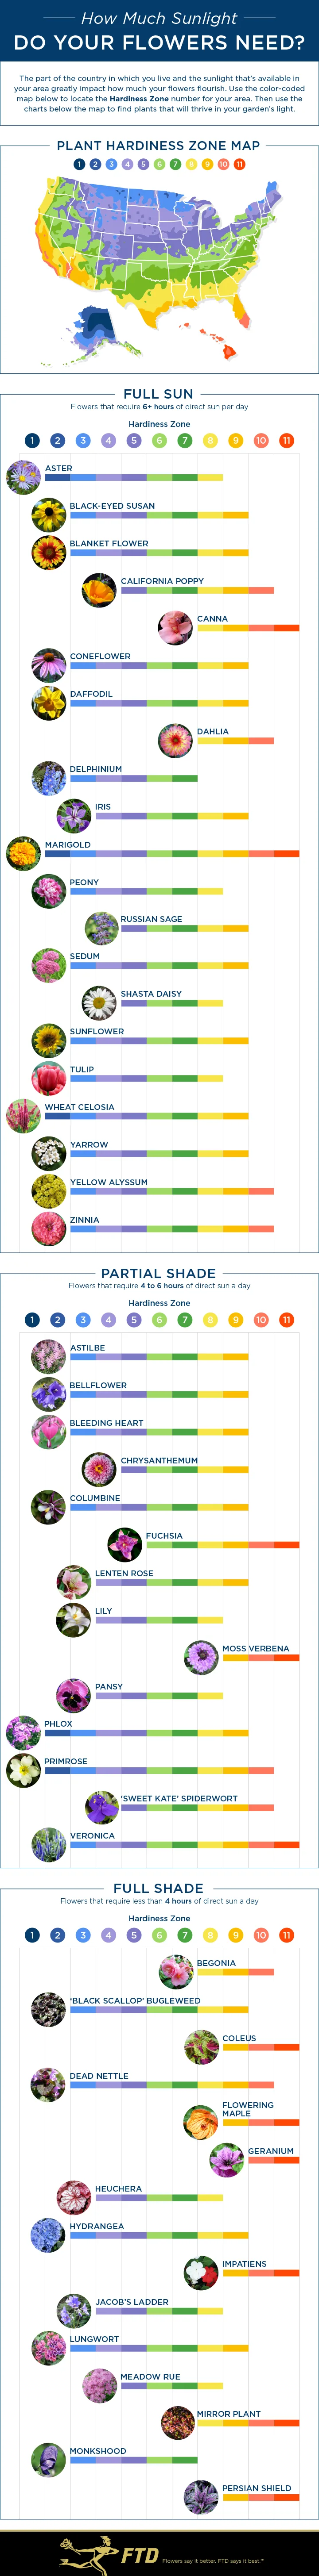 50 Plants and Their Sunlight Needs